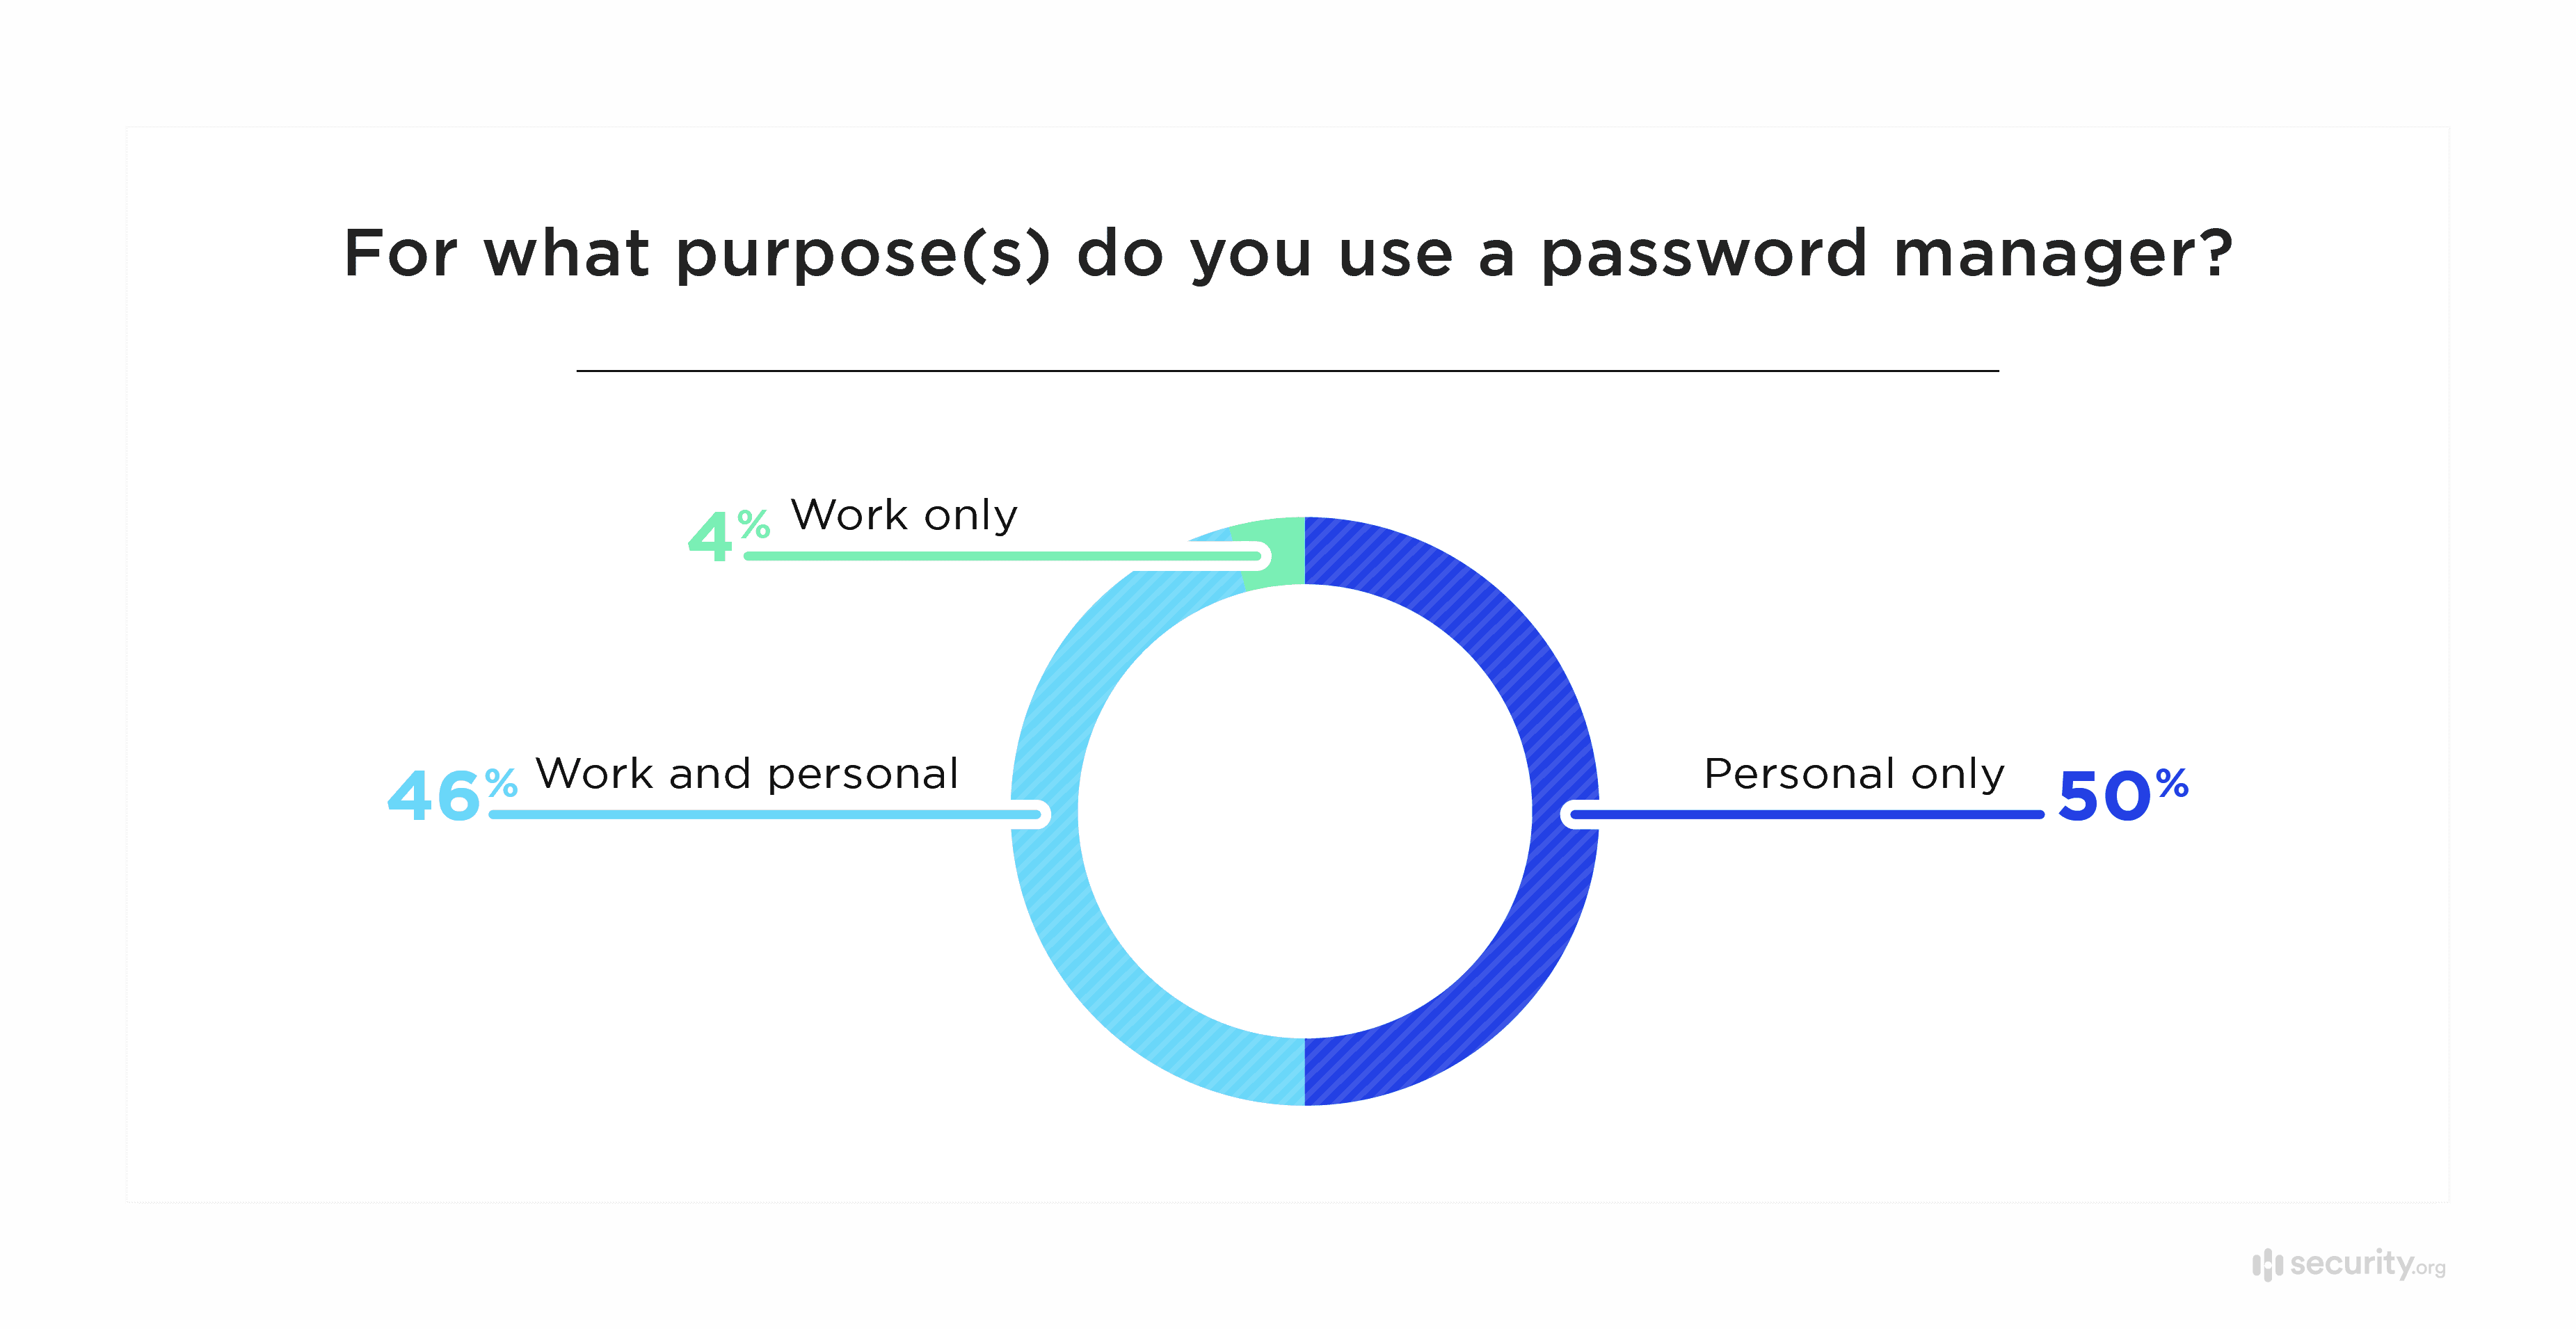 For what purpose(s) do you use a password manager